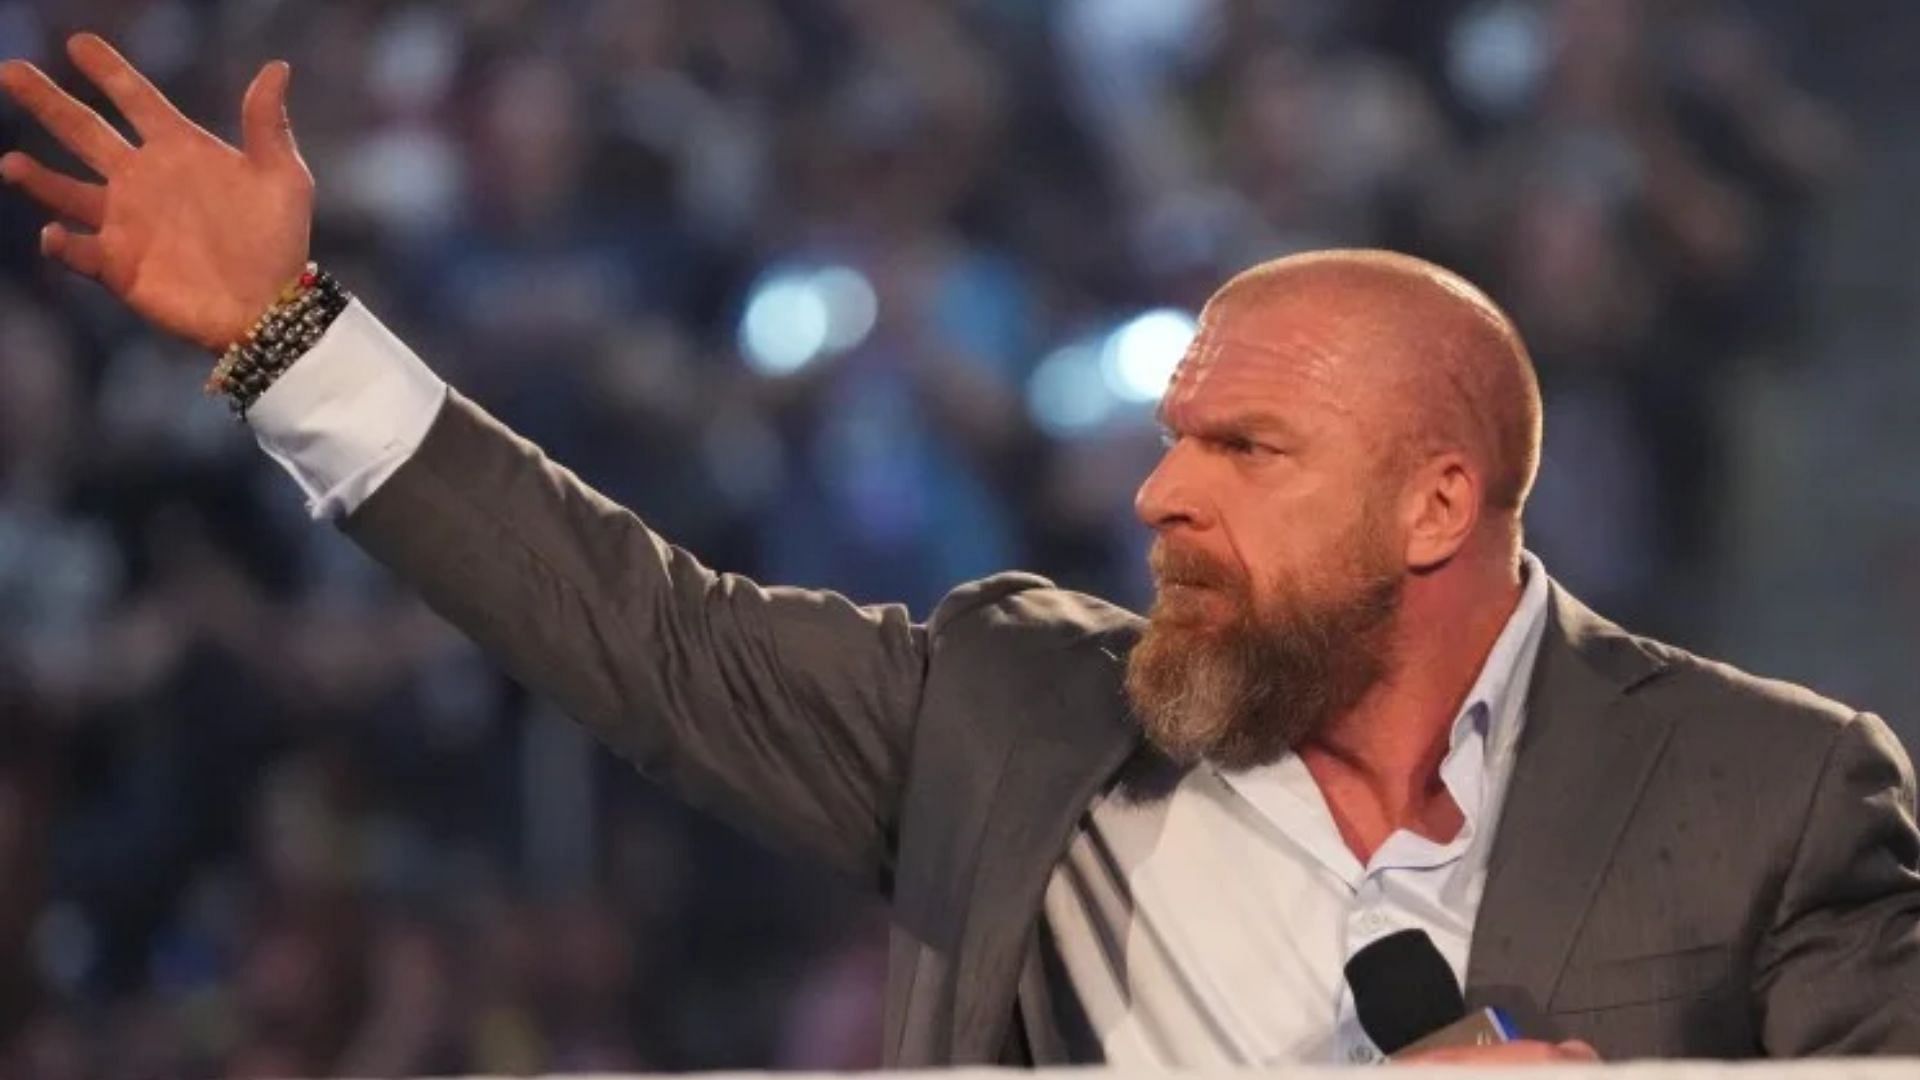 Triple H is the Chief Content Officer and retired wrestler of WWE